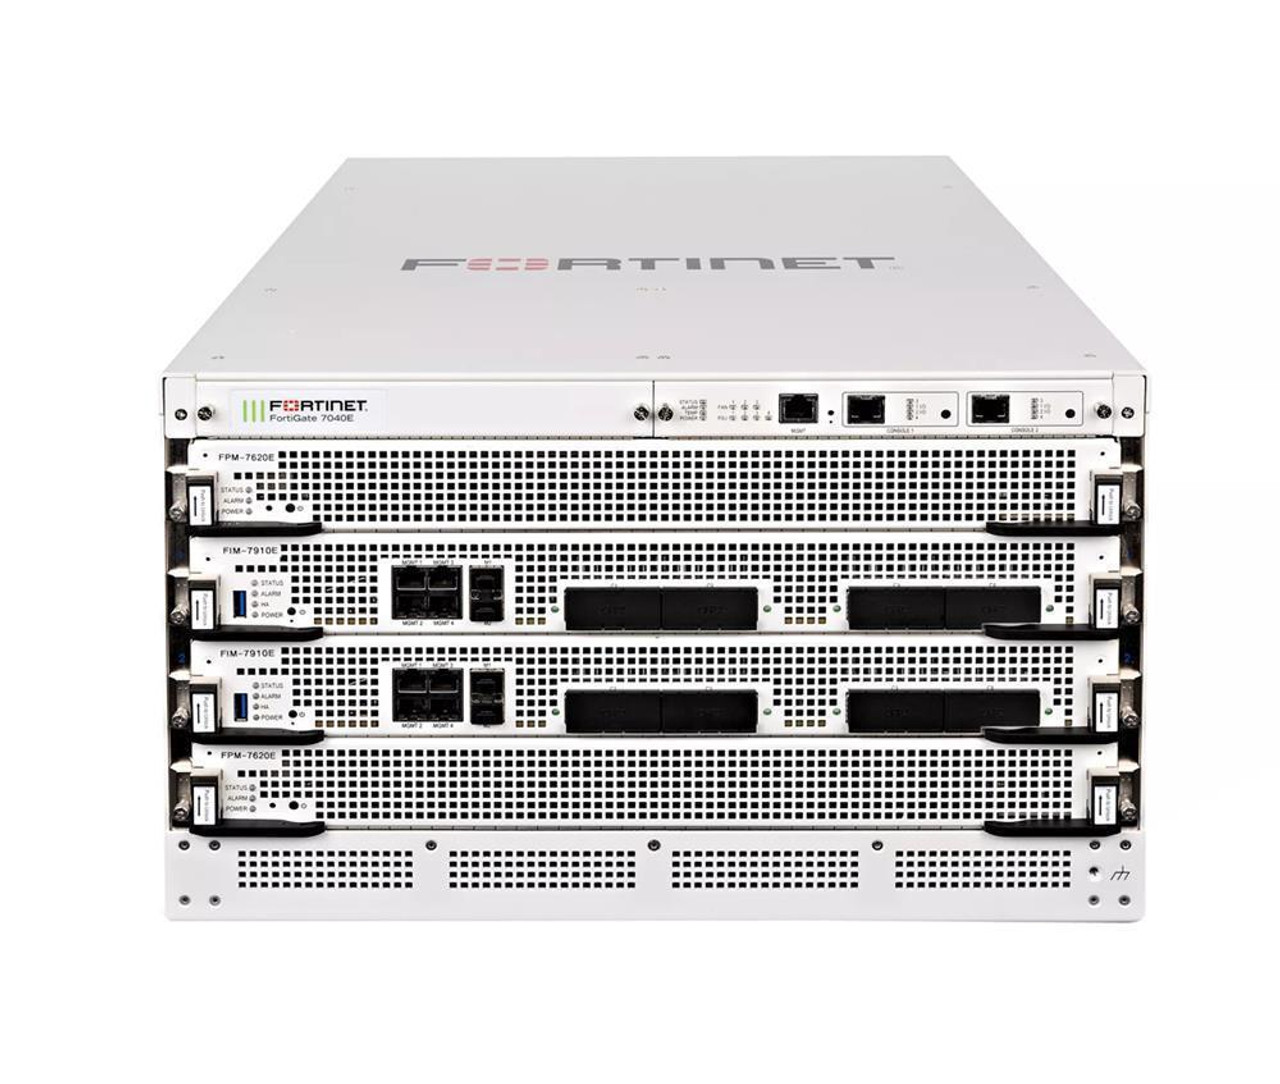 Fortinet FortiGate FG-7040E Network Security/Firewall Appliance - AES (256-bit) SHA-1 - 48000 VPN - 4 Total Expansion Slots - 3 Year 24x7